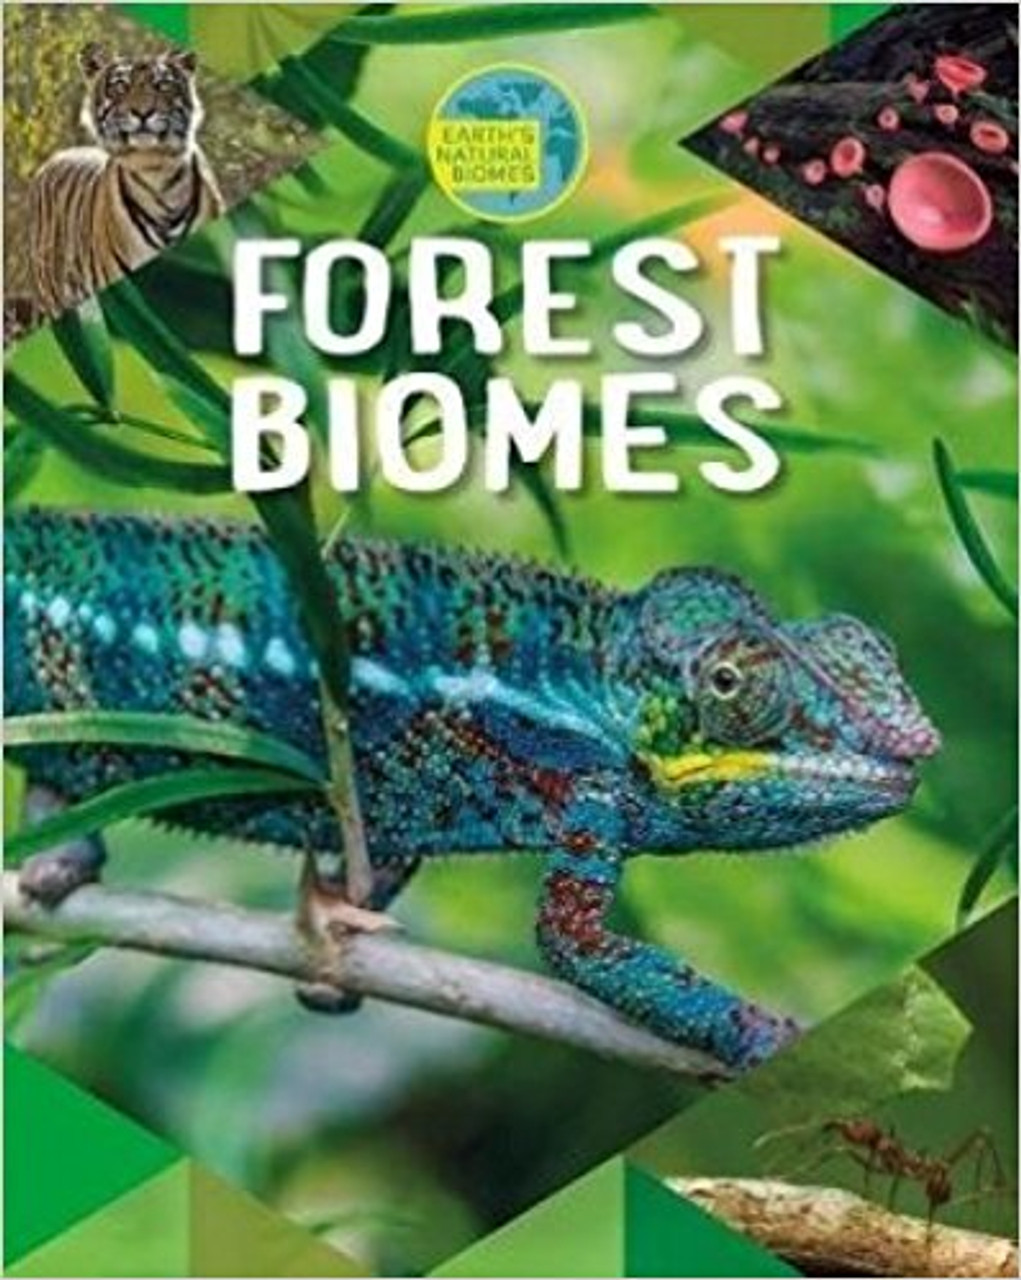 Forest Biomes by Richard Spilsbury